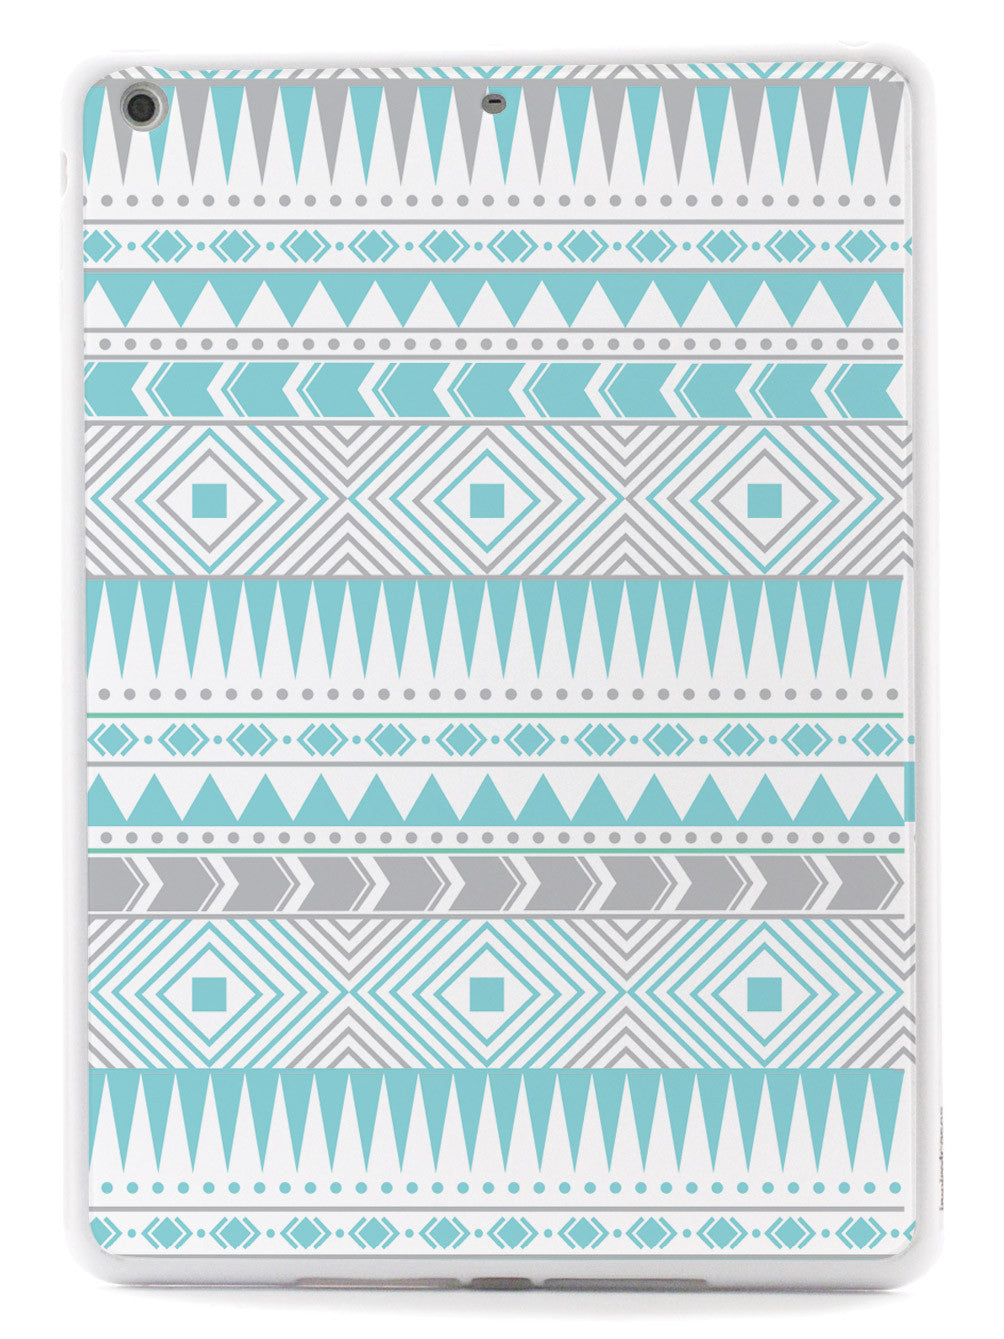 Aztec Pattern - Blue and Gray Case